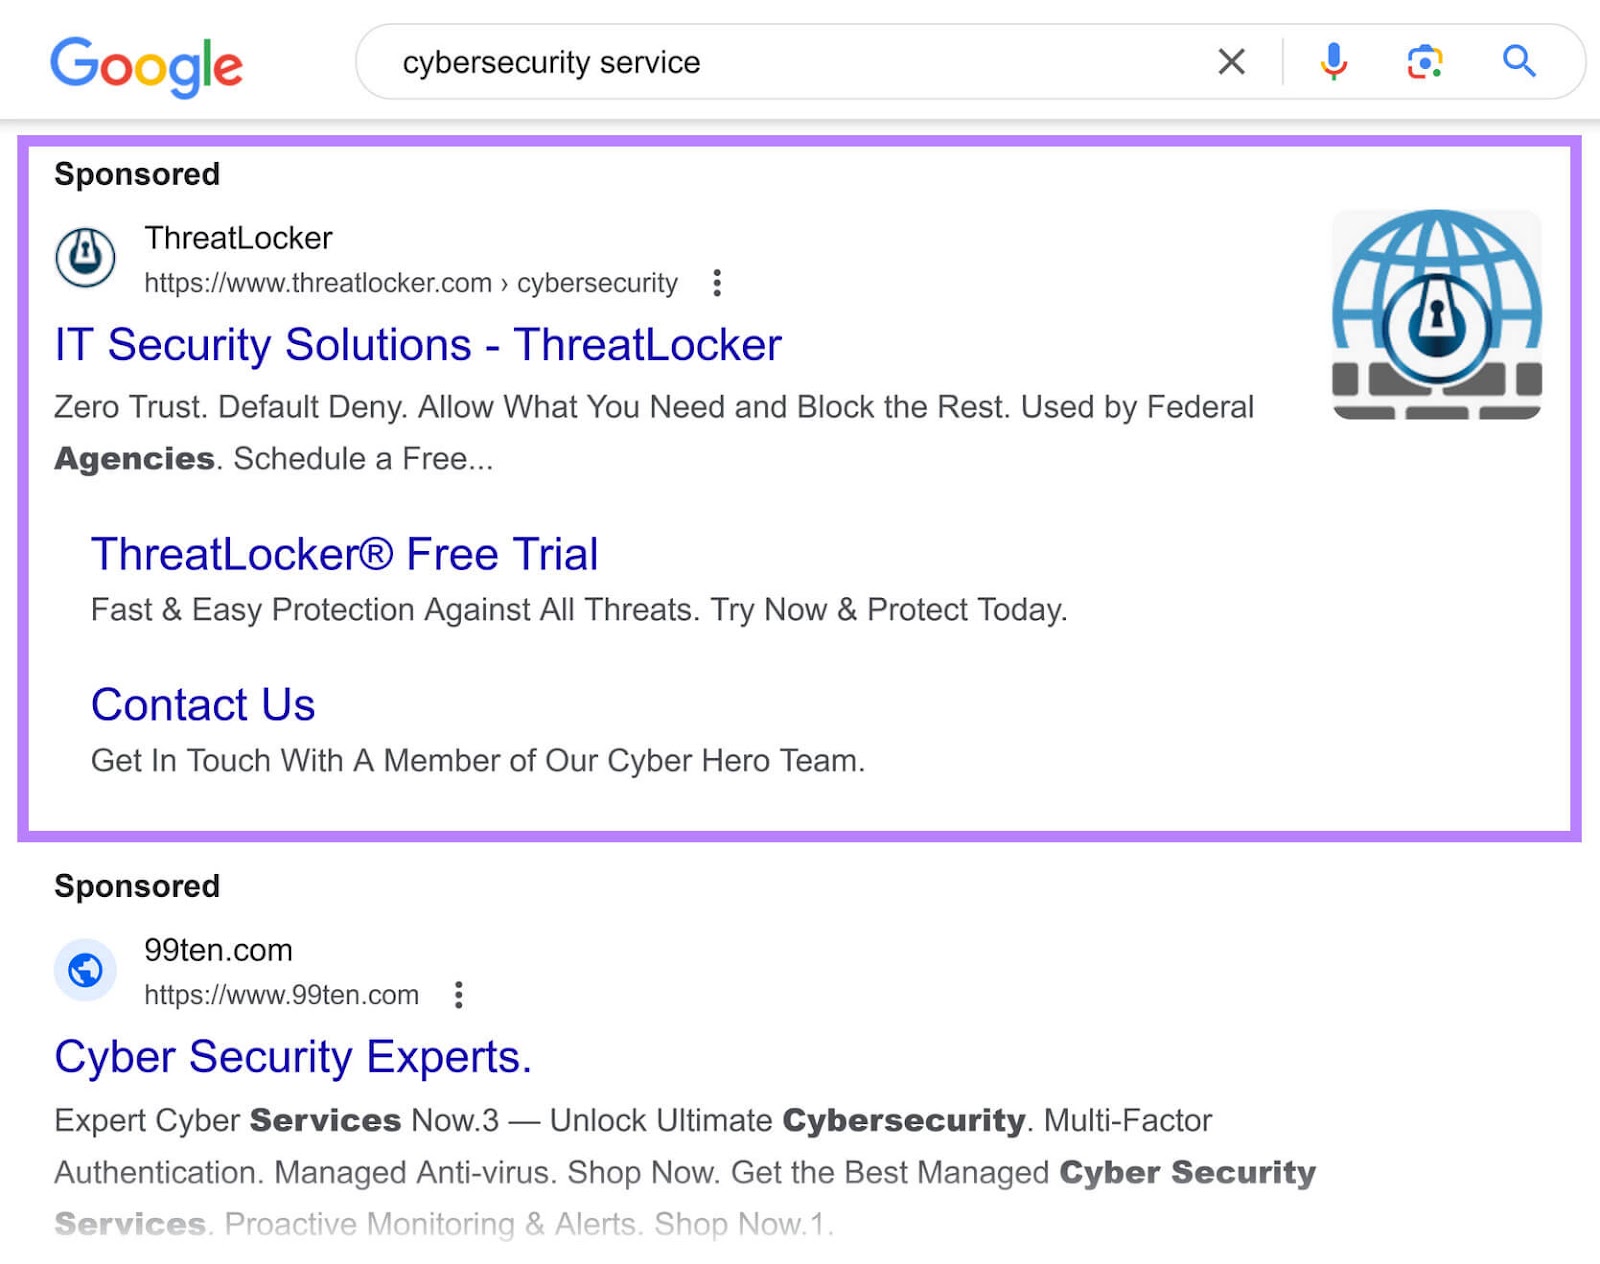 Dynamic hunt  advertisement  (DSA) connected  Google SERP for "cybersecurity service"